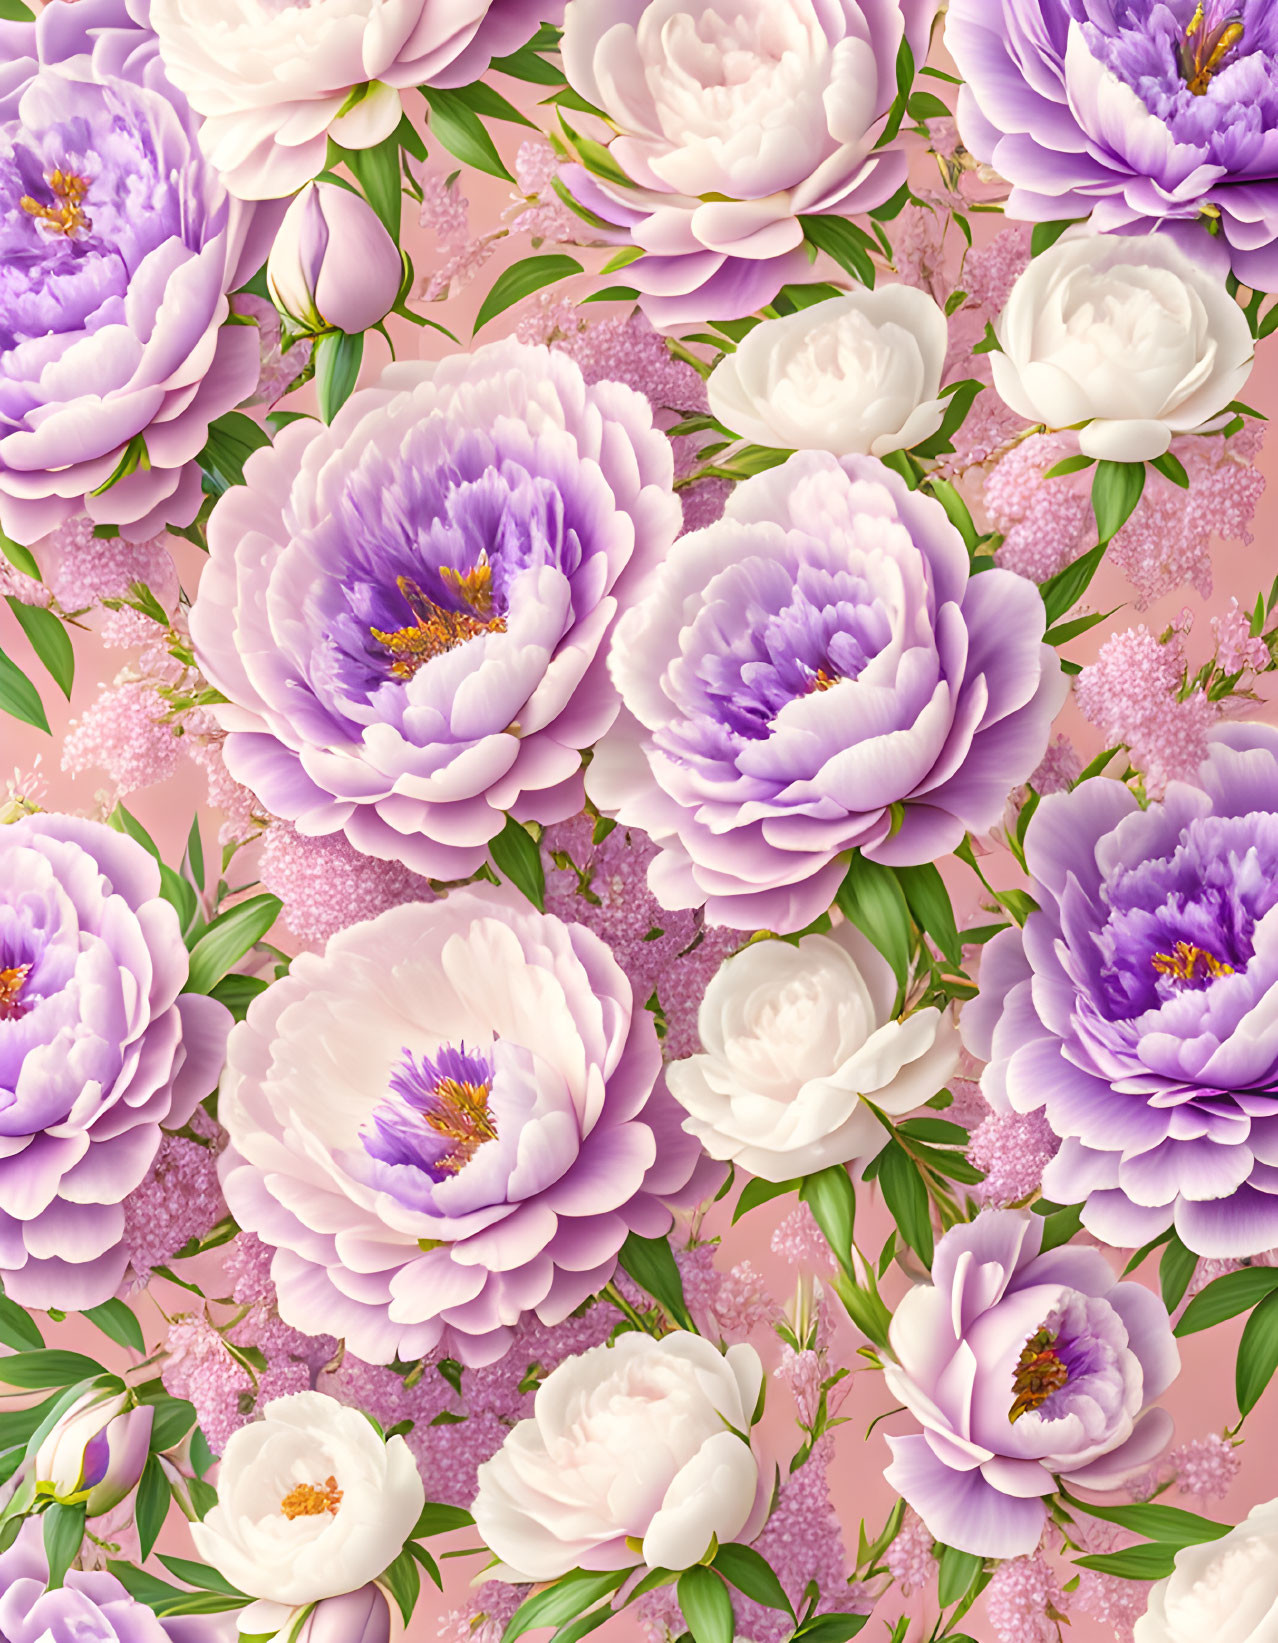 Floral Pattern: Purple and White Peonies on Pink Background